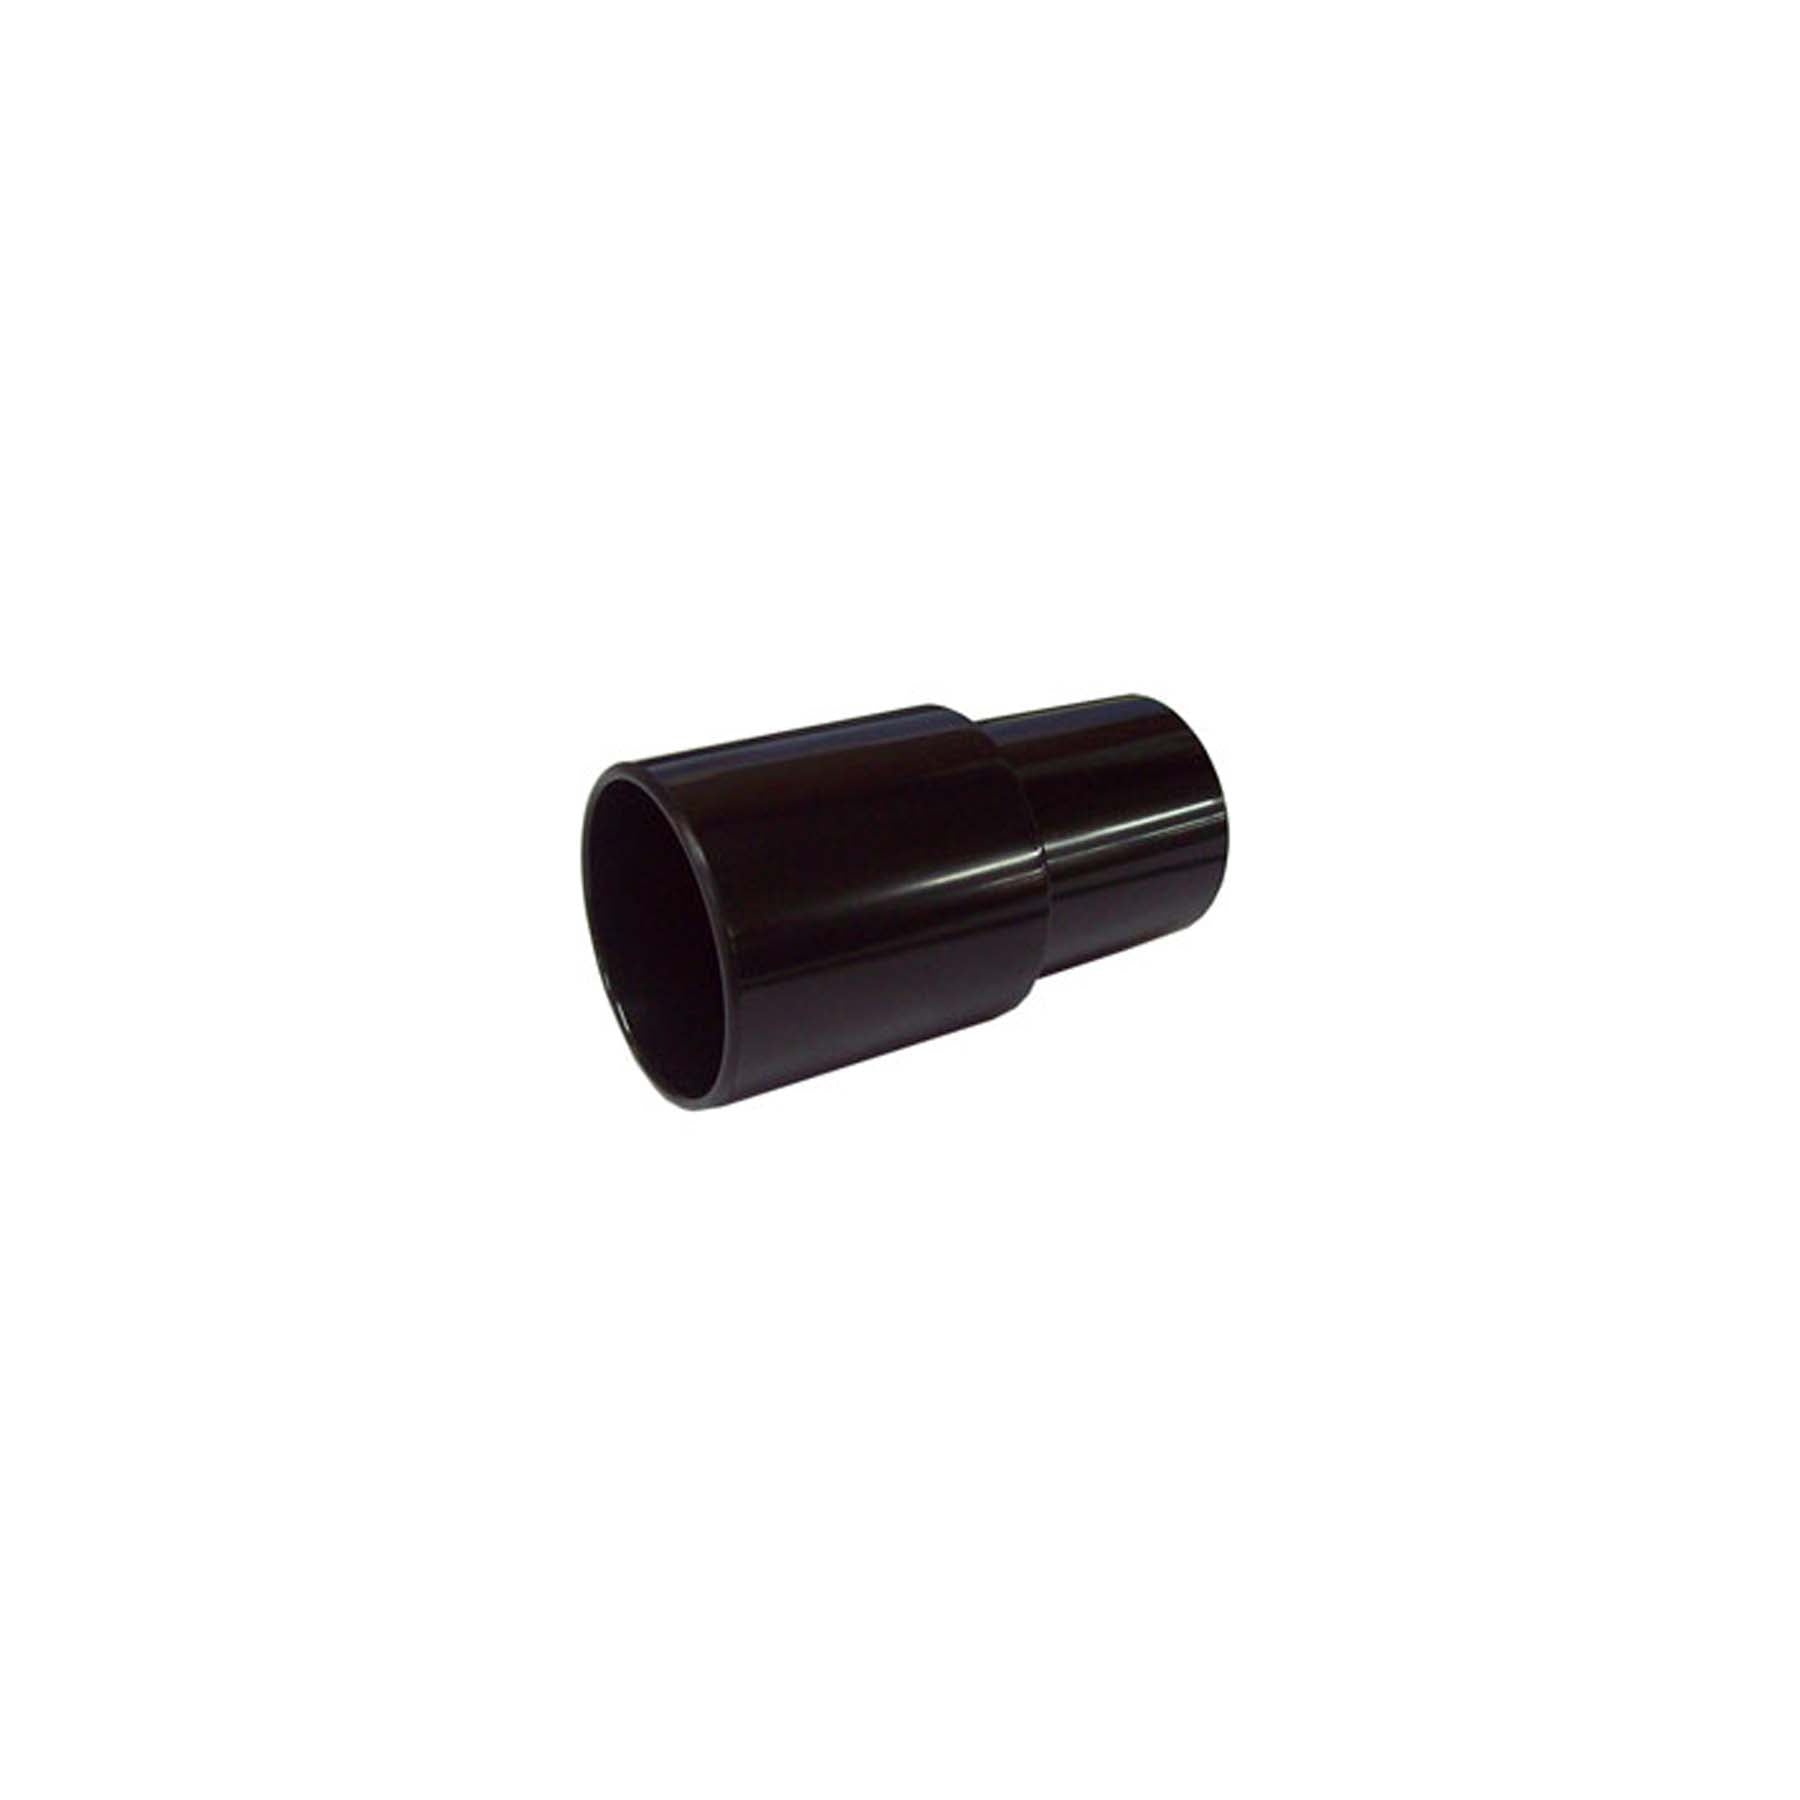 ADAPTOR INCREASER - SUITS 32MM NECK TO 35MM ROD -  ADAP3